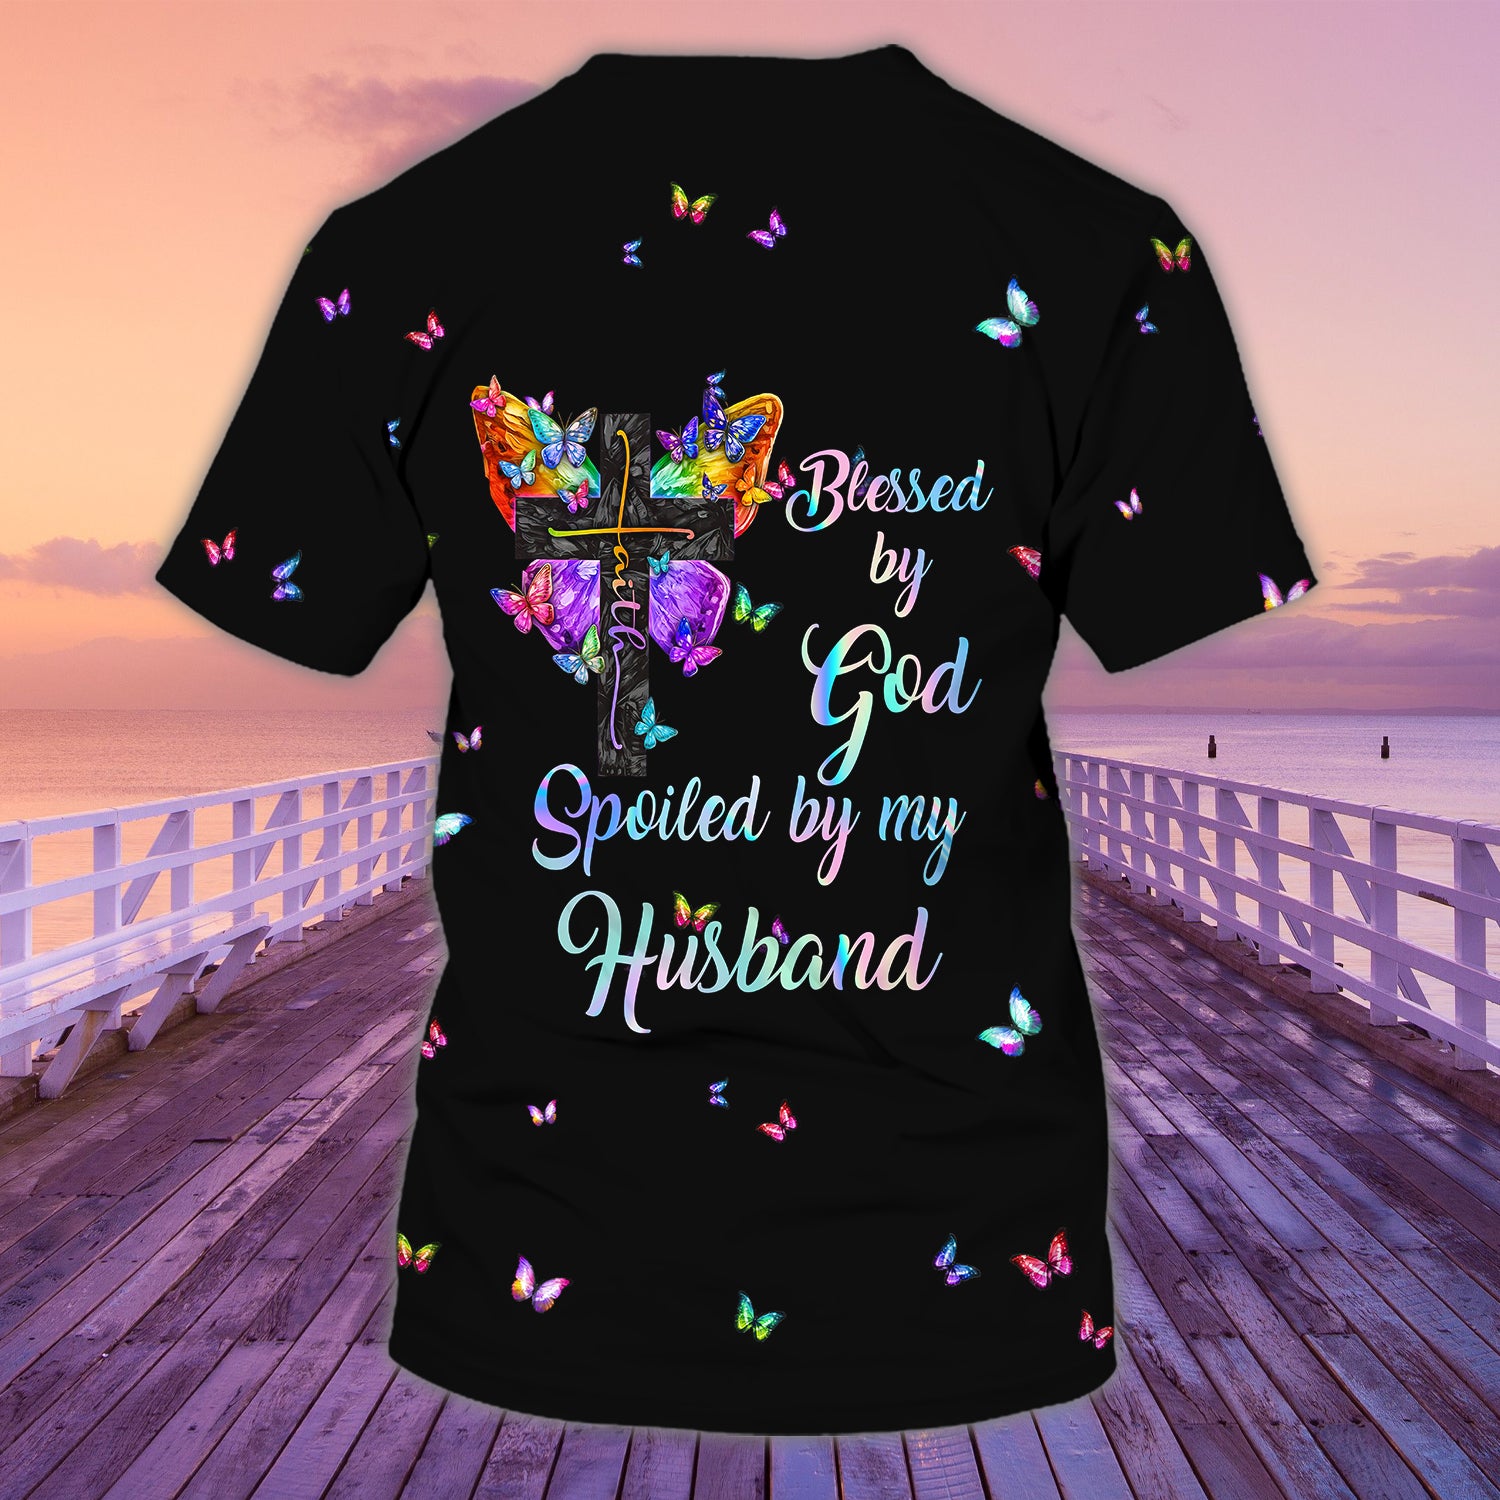 Spoiled Wife - Personalized Name 3D Tshirt 54 - Bhn97 9